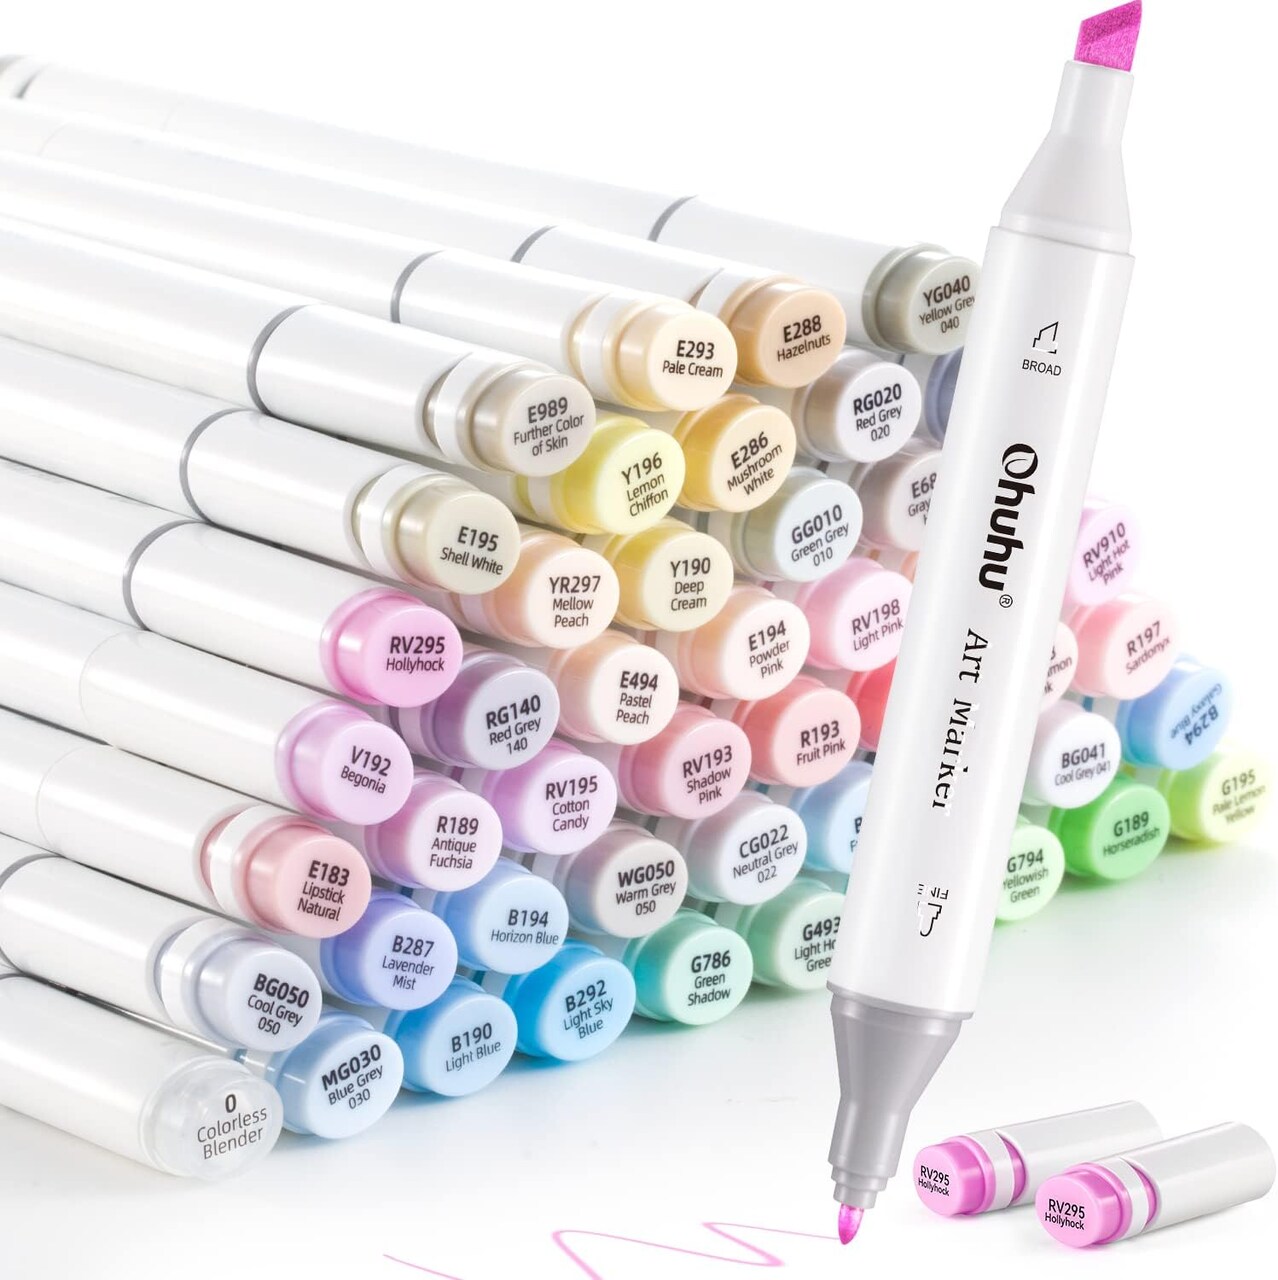 Ohuhu Alcohol Markers 48 Pastel Colors- Double Tipped Art Marker